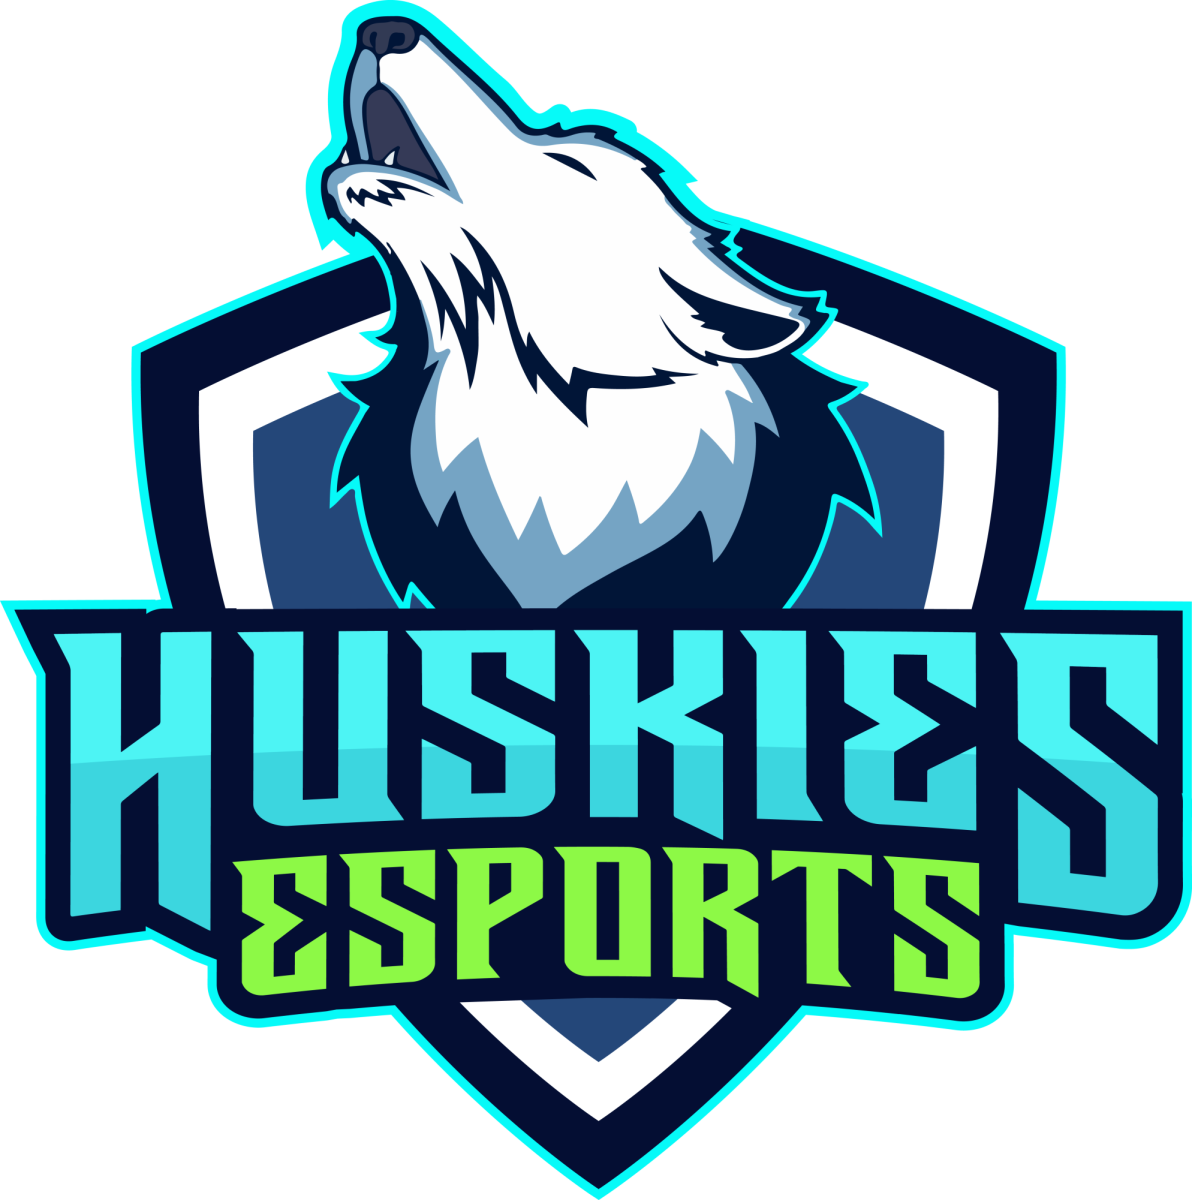 Huskys ESPORTS team gives students a chance to show off their skills